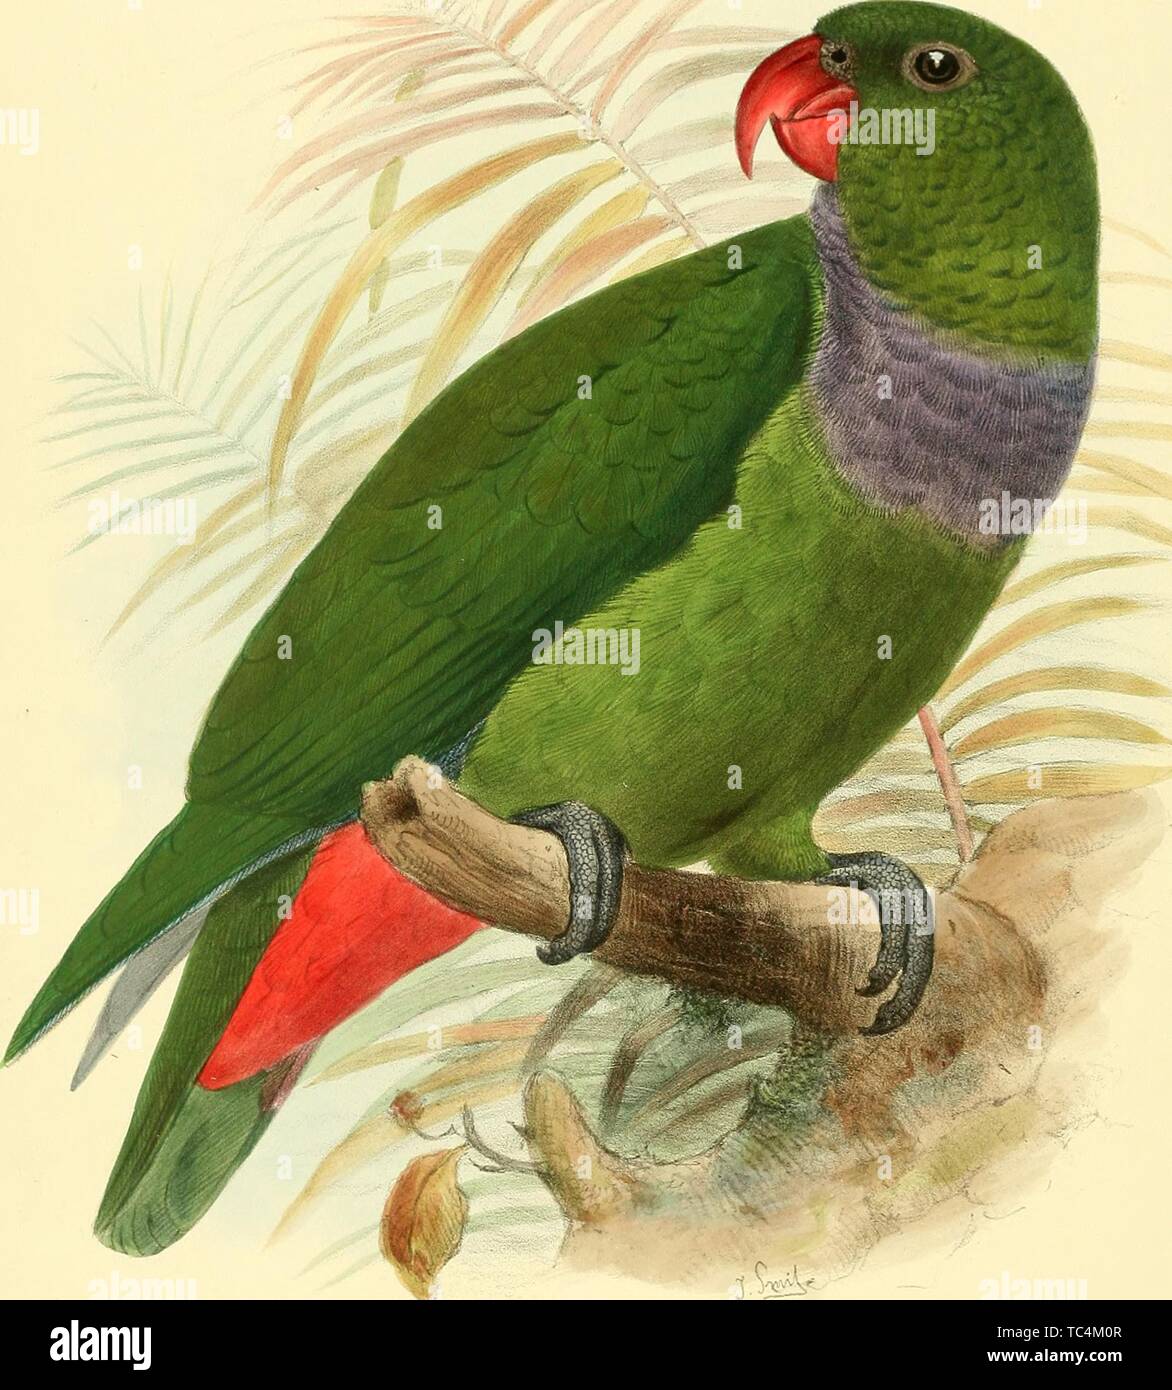 Engraving of the Red-billed Pionus Parrot (Pionus Corallinus), from the book 'Ornithological miscellany' by George Dawson Rowley and John Gerrard Keulemans, 1876. Courtesy Internet Archive. () Stock Photo